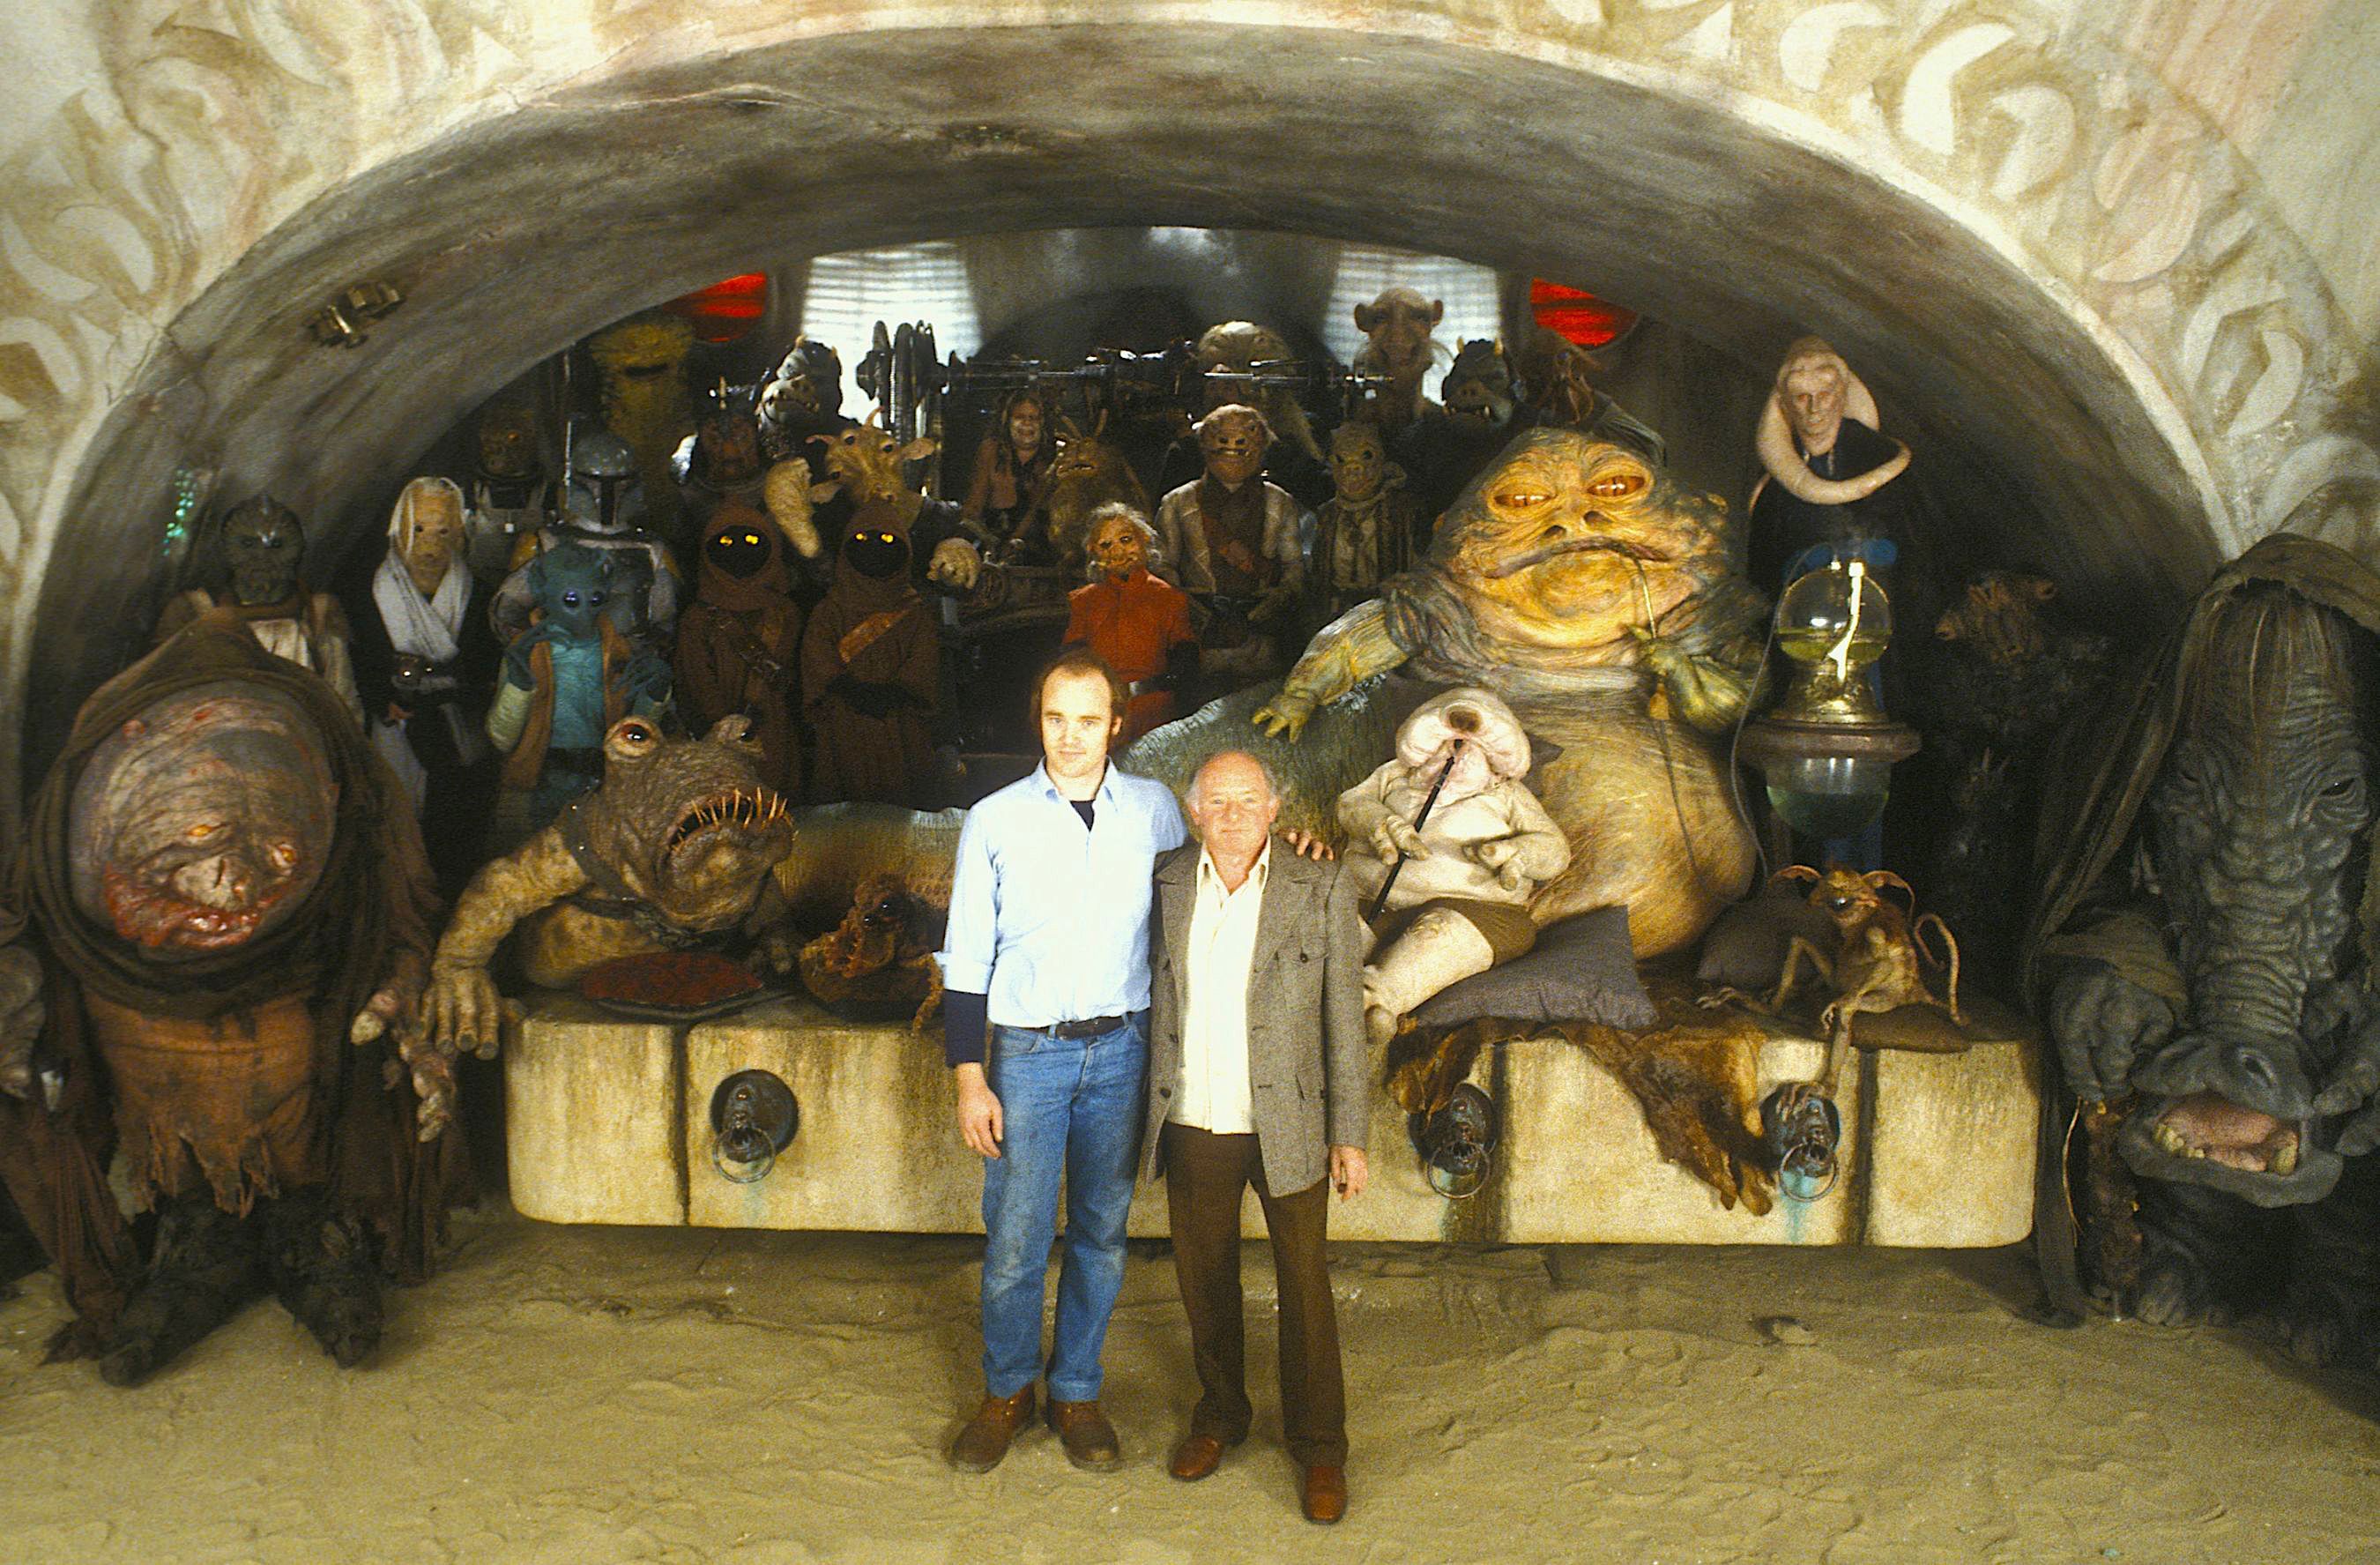 two men pose on a movie set surrounded by actors in alien costumes